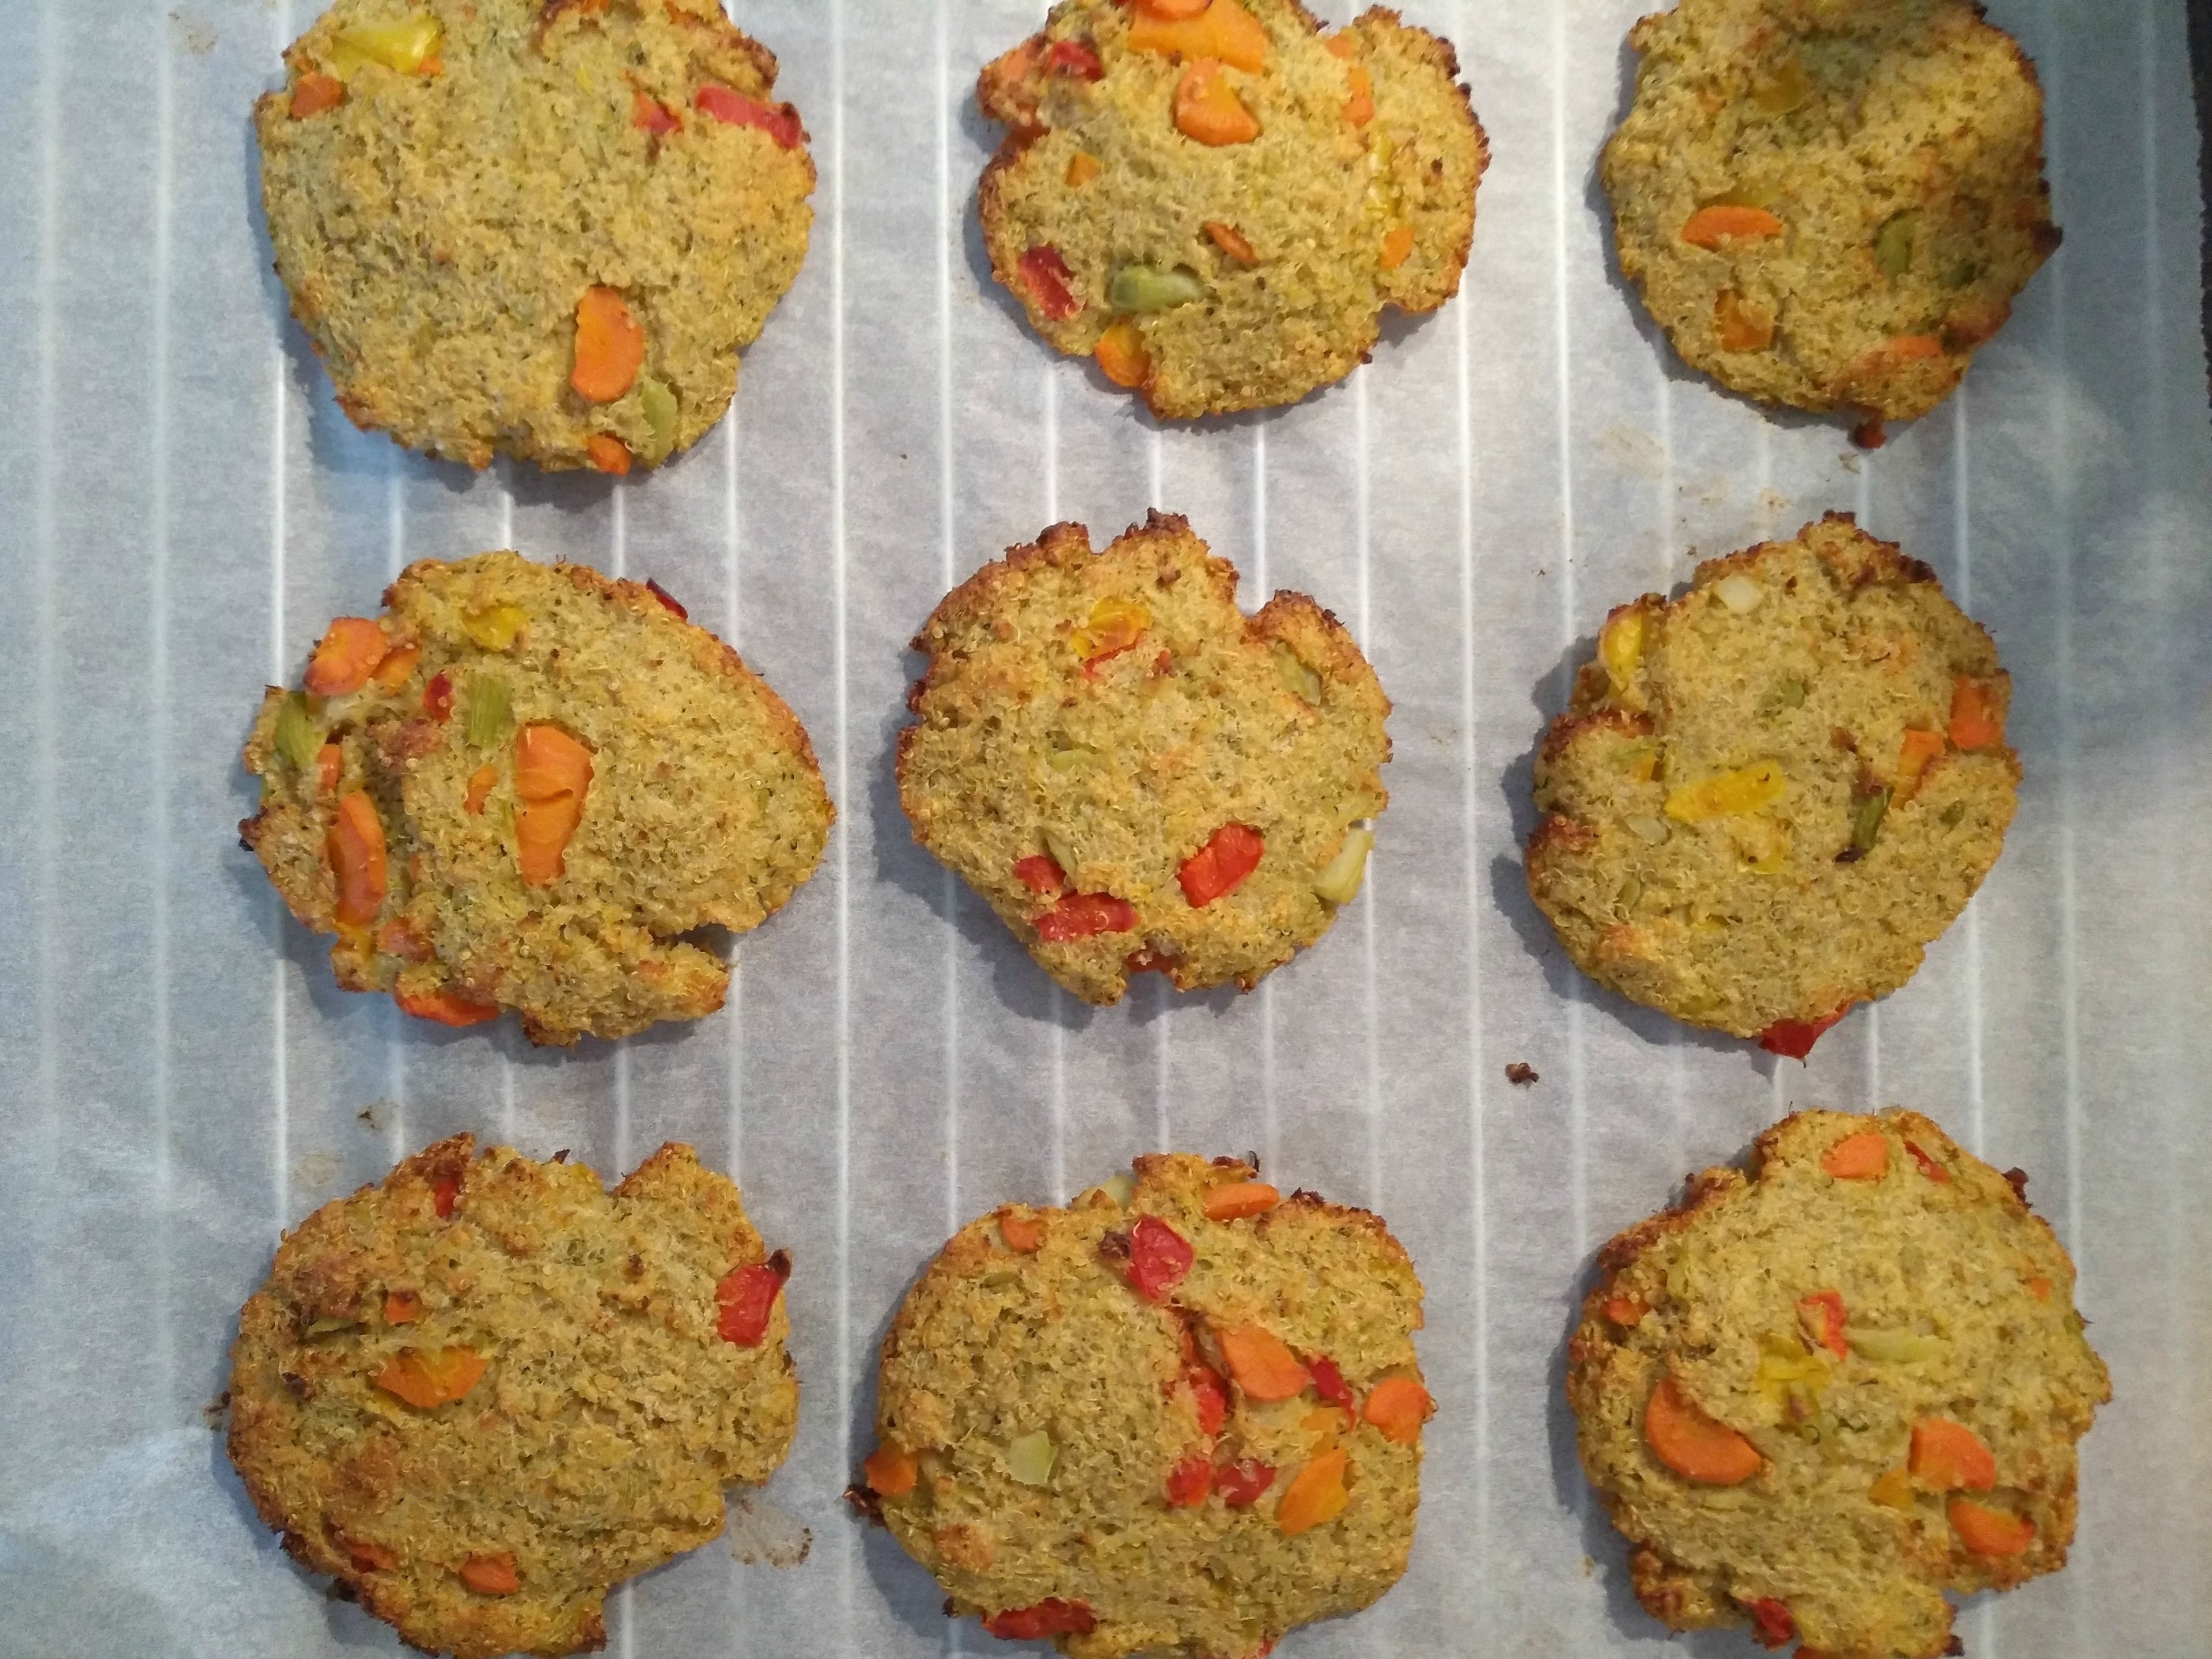 Baked vegetable and quinoa patties